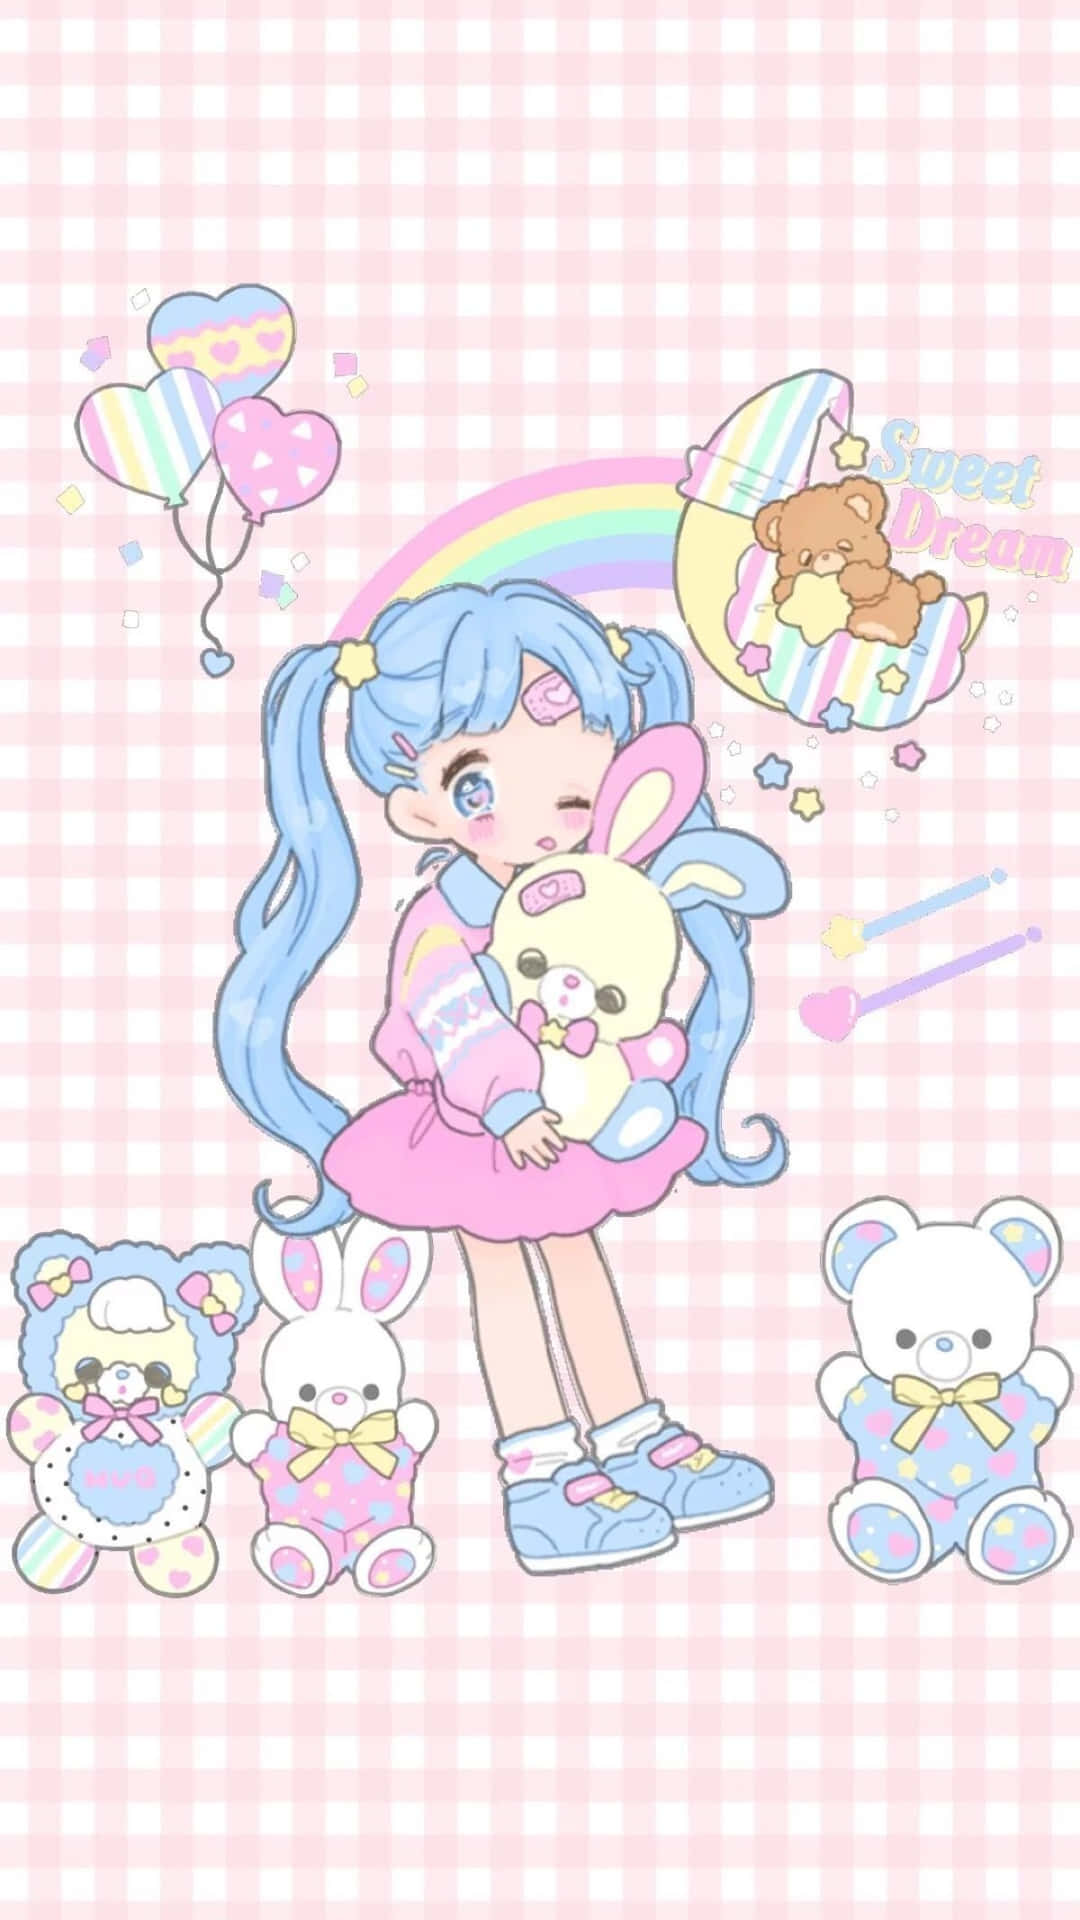 Pin on Potential wallpapers  Iphone wallpaper kawaii Cute galaxy wallpaper  Kawaii wallpaper